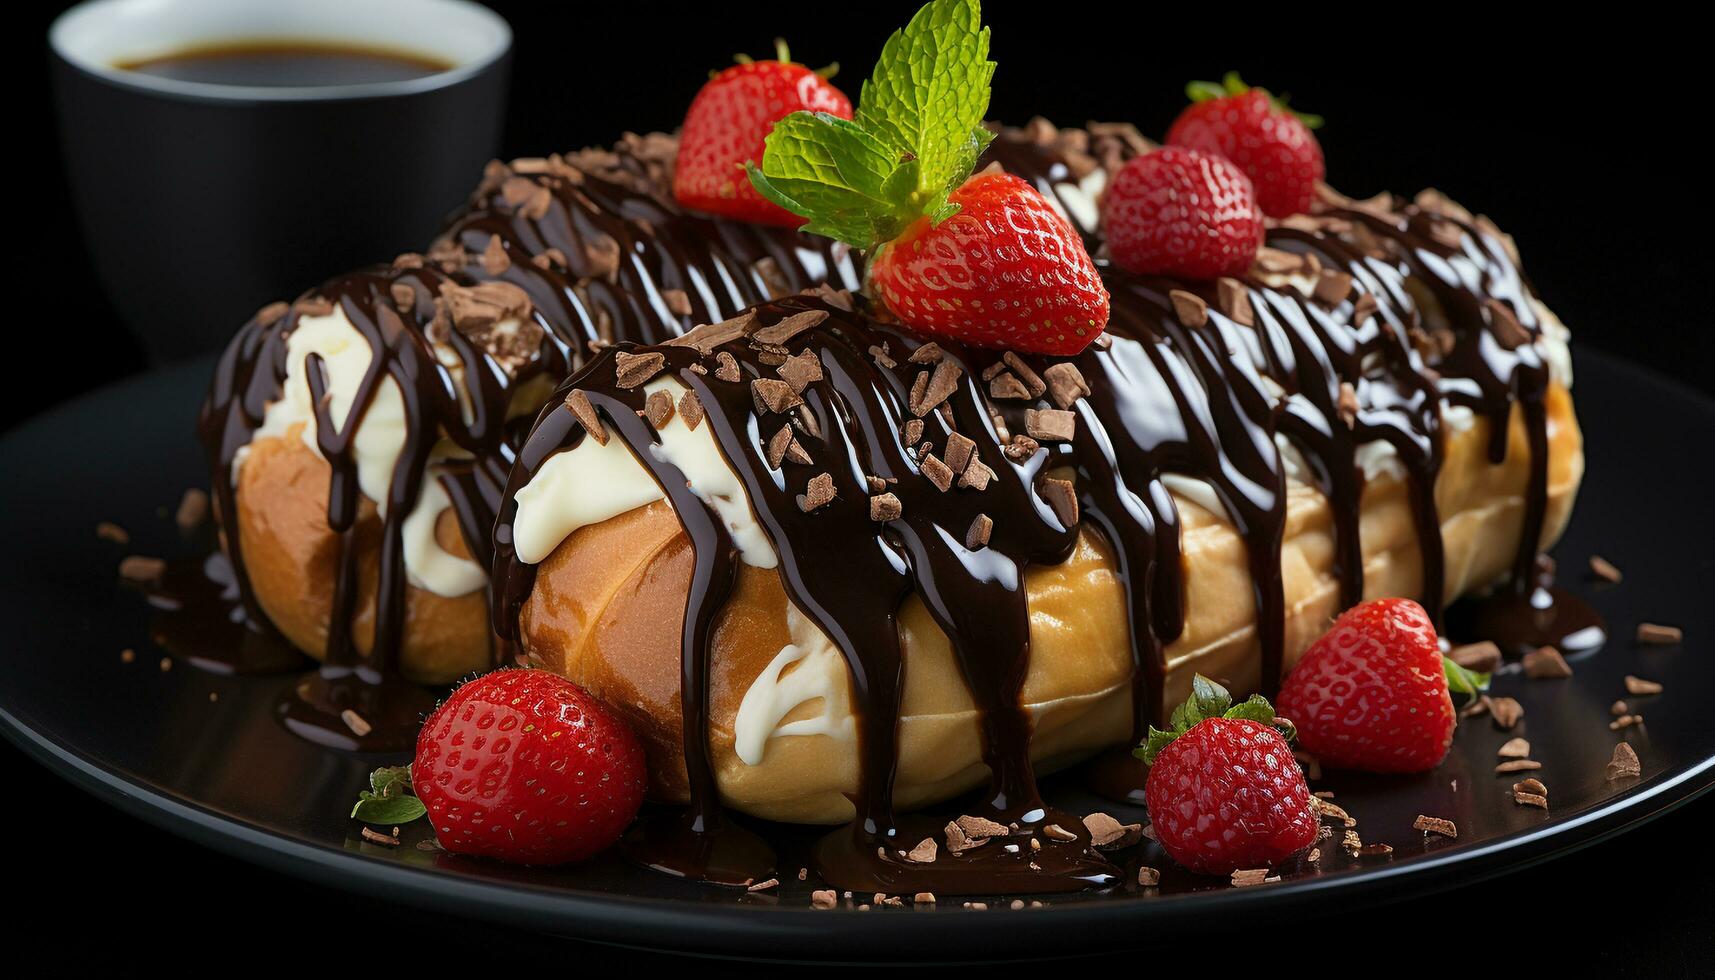 Freshness of fruit and sweetness of chocolate on a gourmet plate generated by AI photo